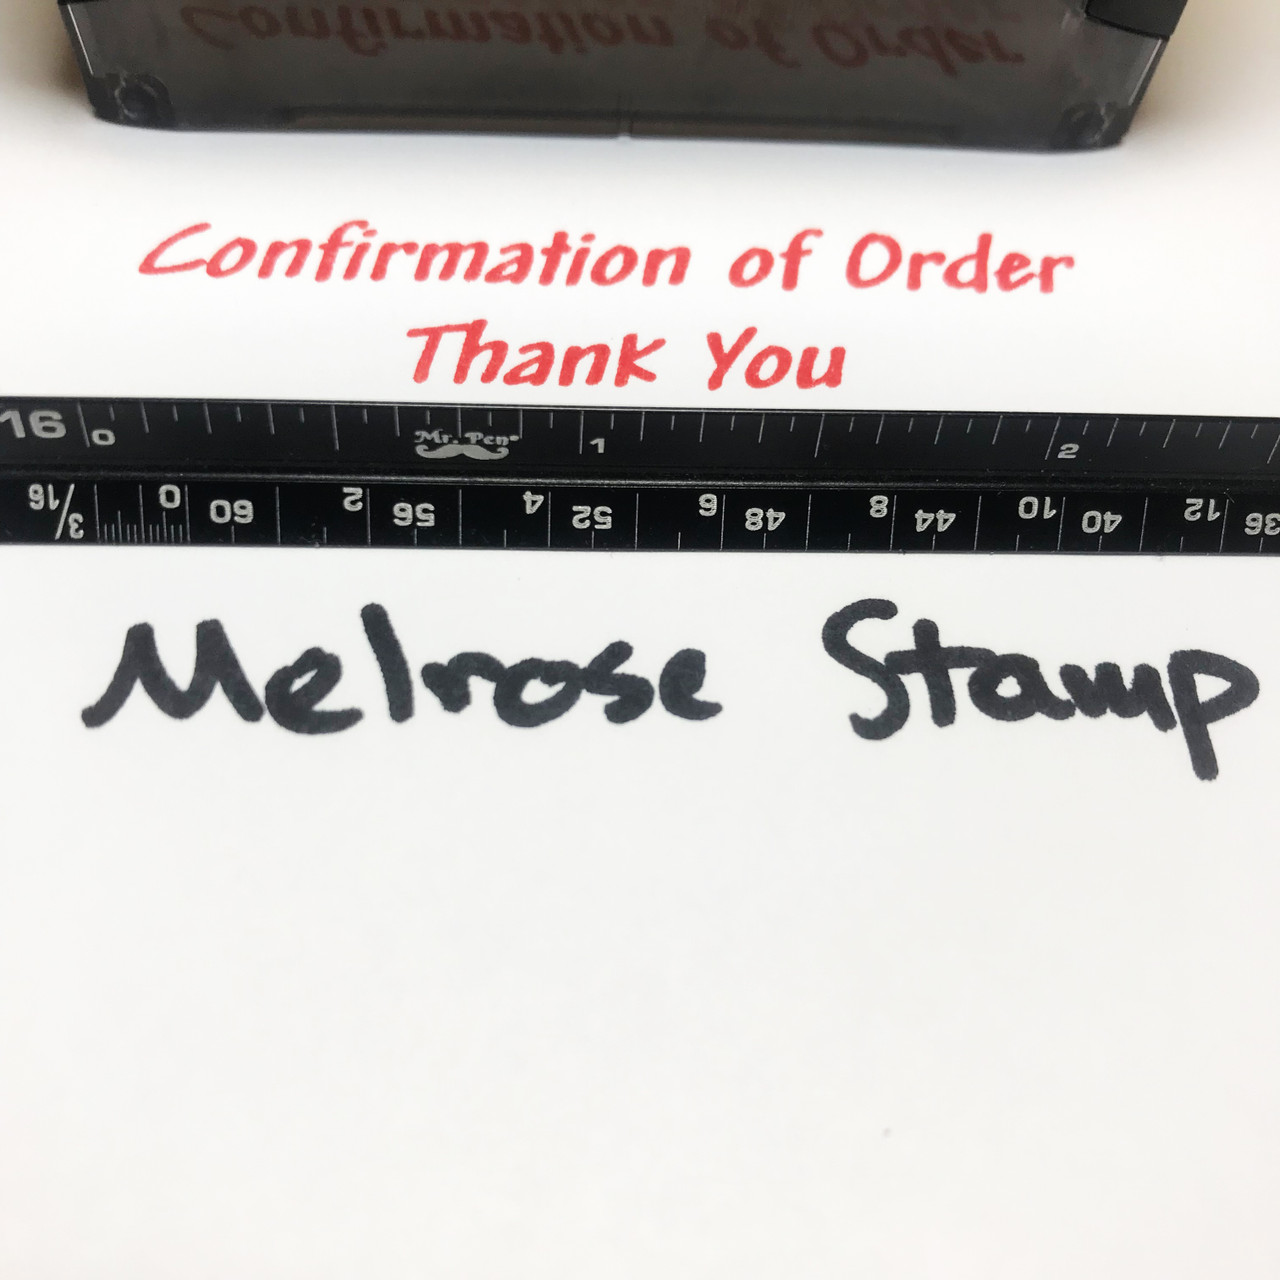 CONFIRMATION OF ORDER THANK YOU Rubber Stamp for office use self-inking -  Melrose Stamp Company